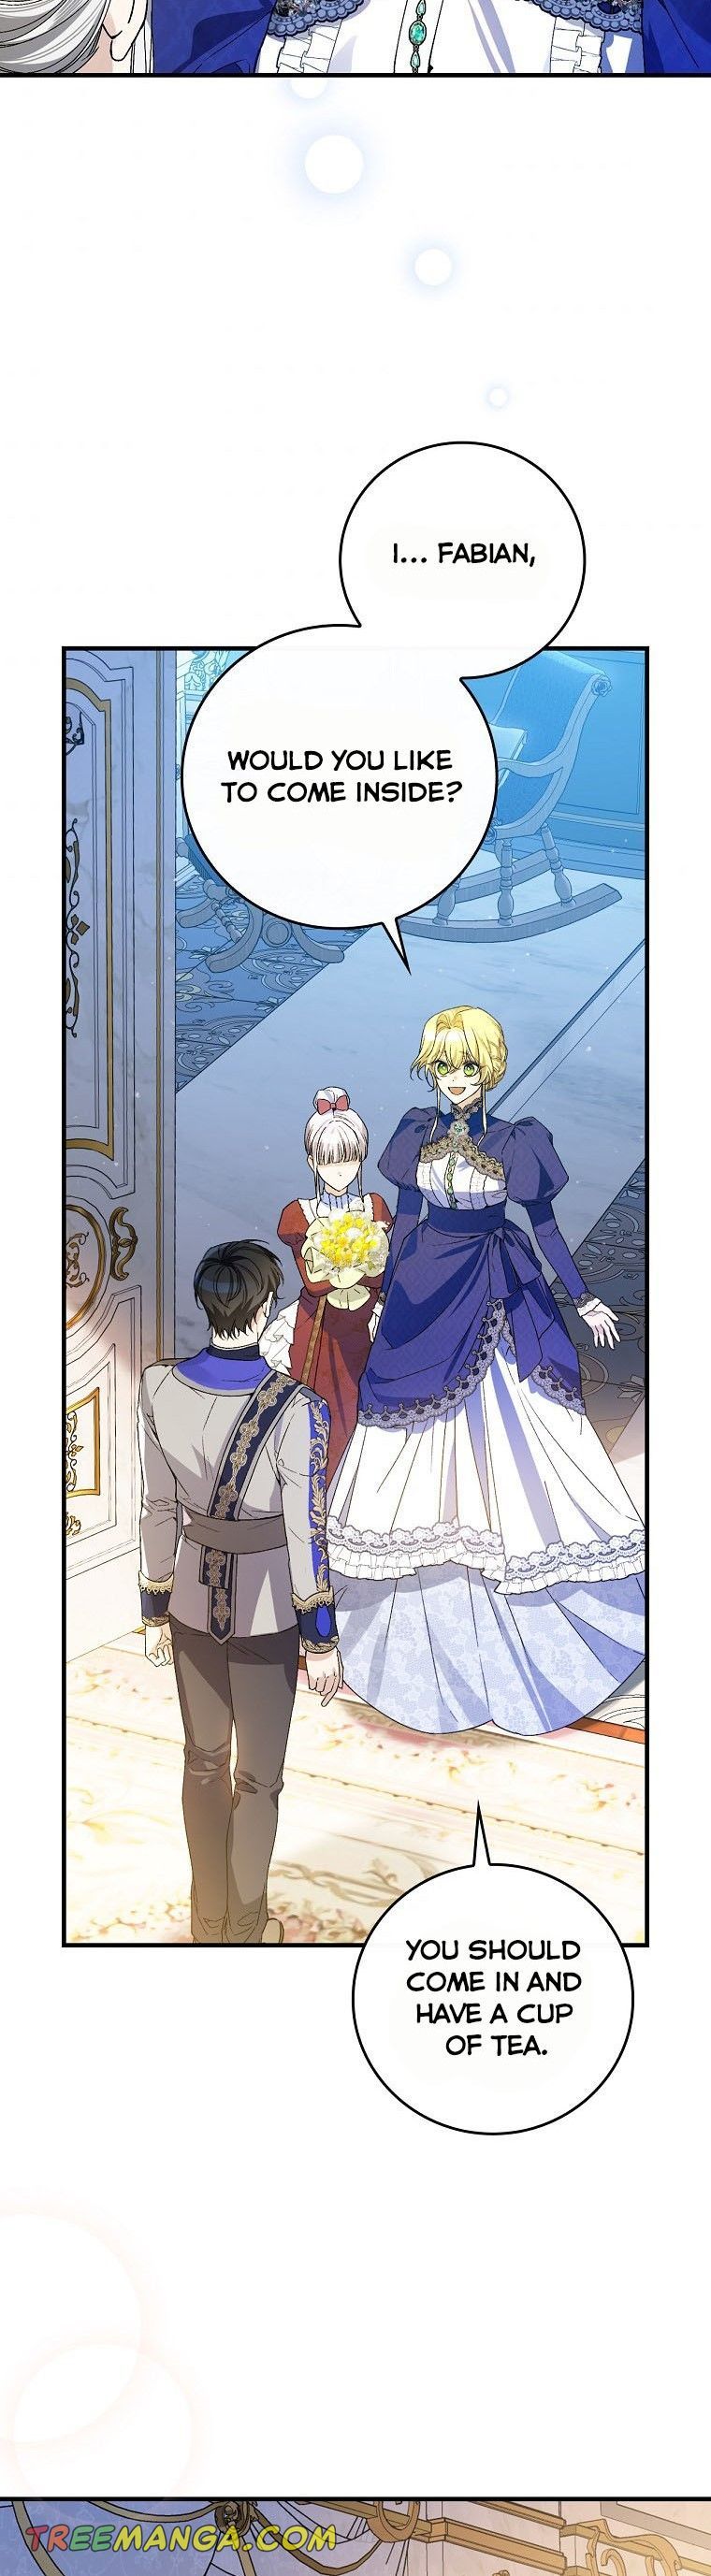 A Perfect Ending Plan of the Villain in a Fairy Tale chapter 35 - Page 40